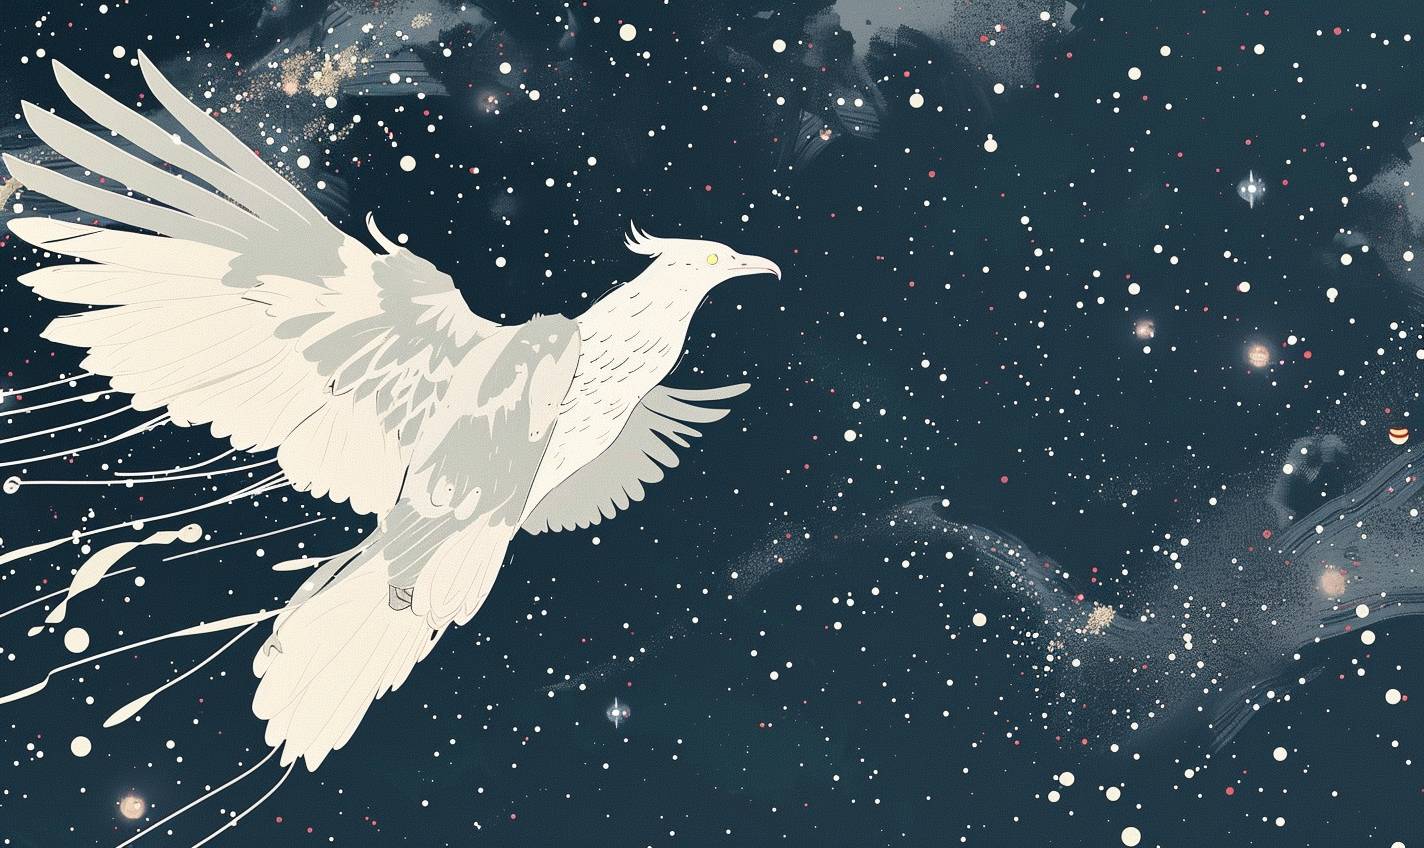 In the style of Harriet Lee-Merrion, cosmic phoenix gliding through the cosmos